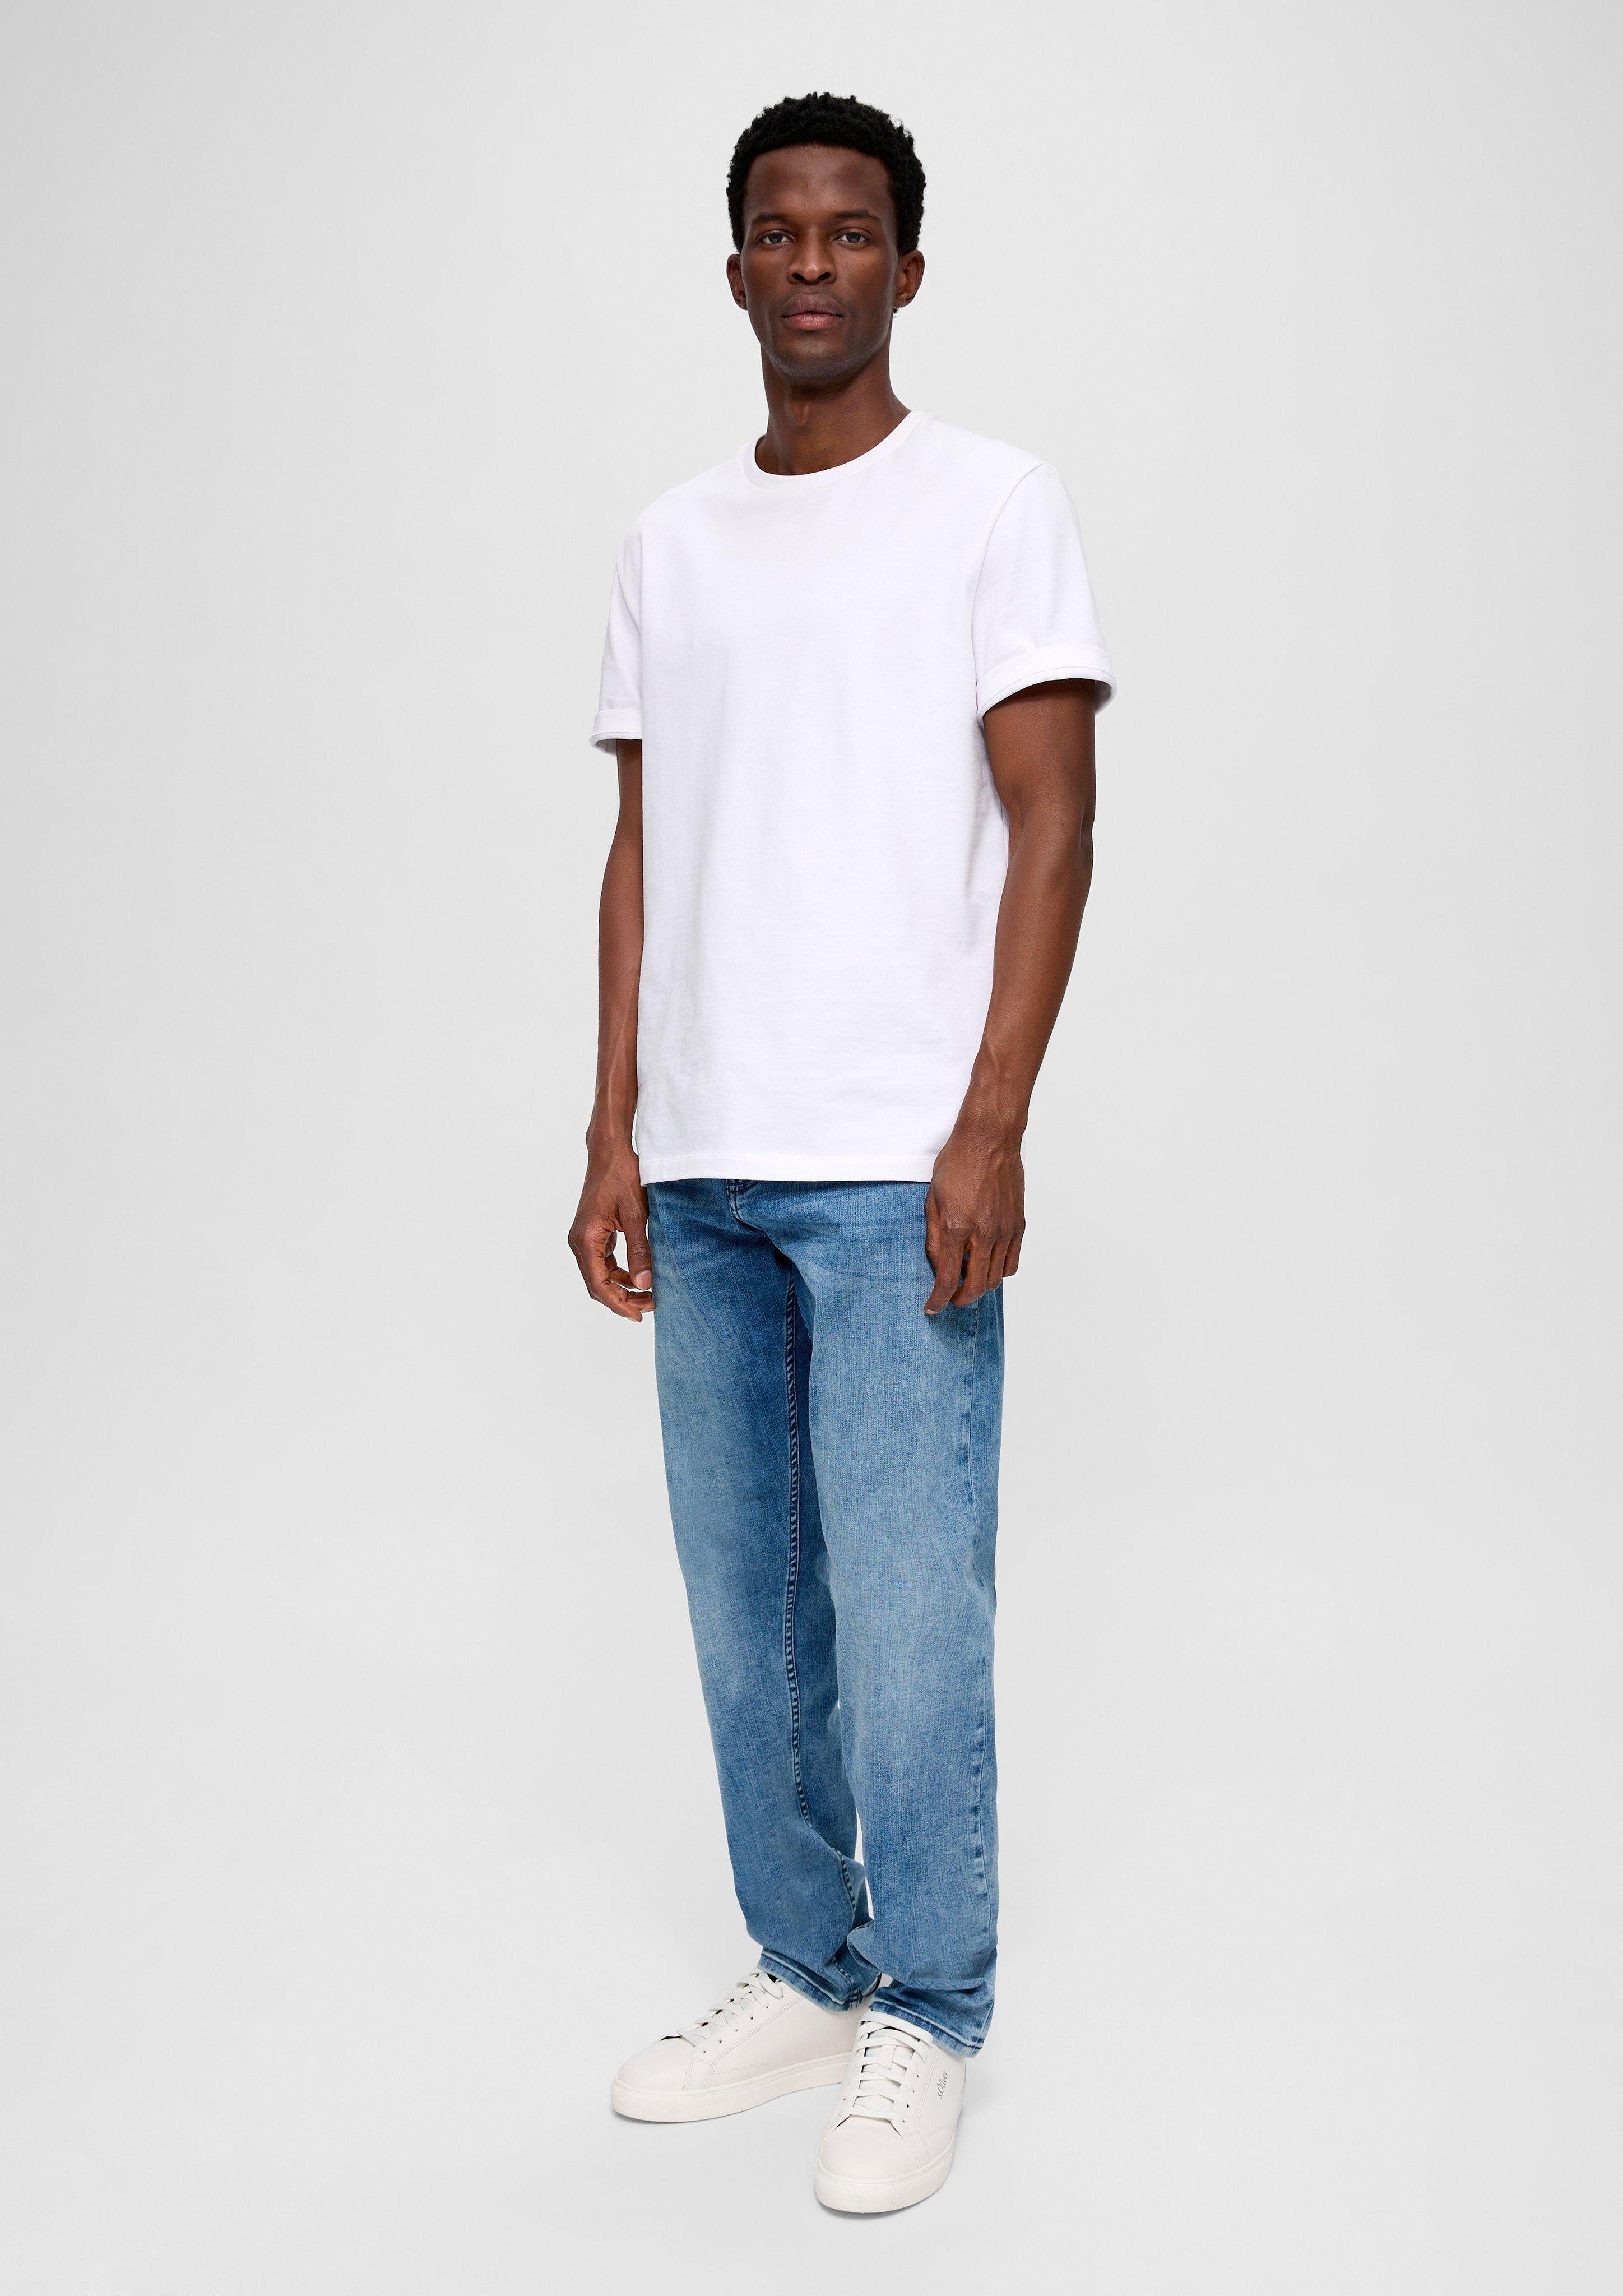 s.Oliver Stoffhose Jeans Mauro / High / Rise Regular / Tapered Label-Patch, Fit Waschung Leg